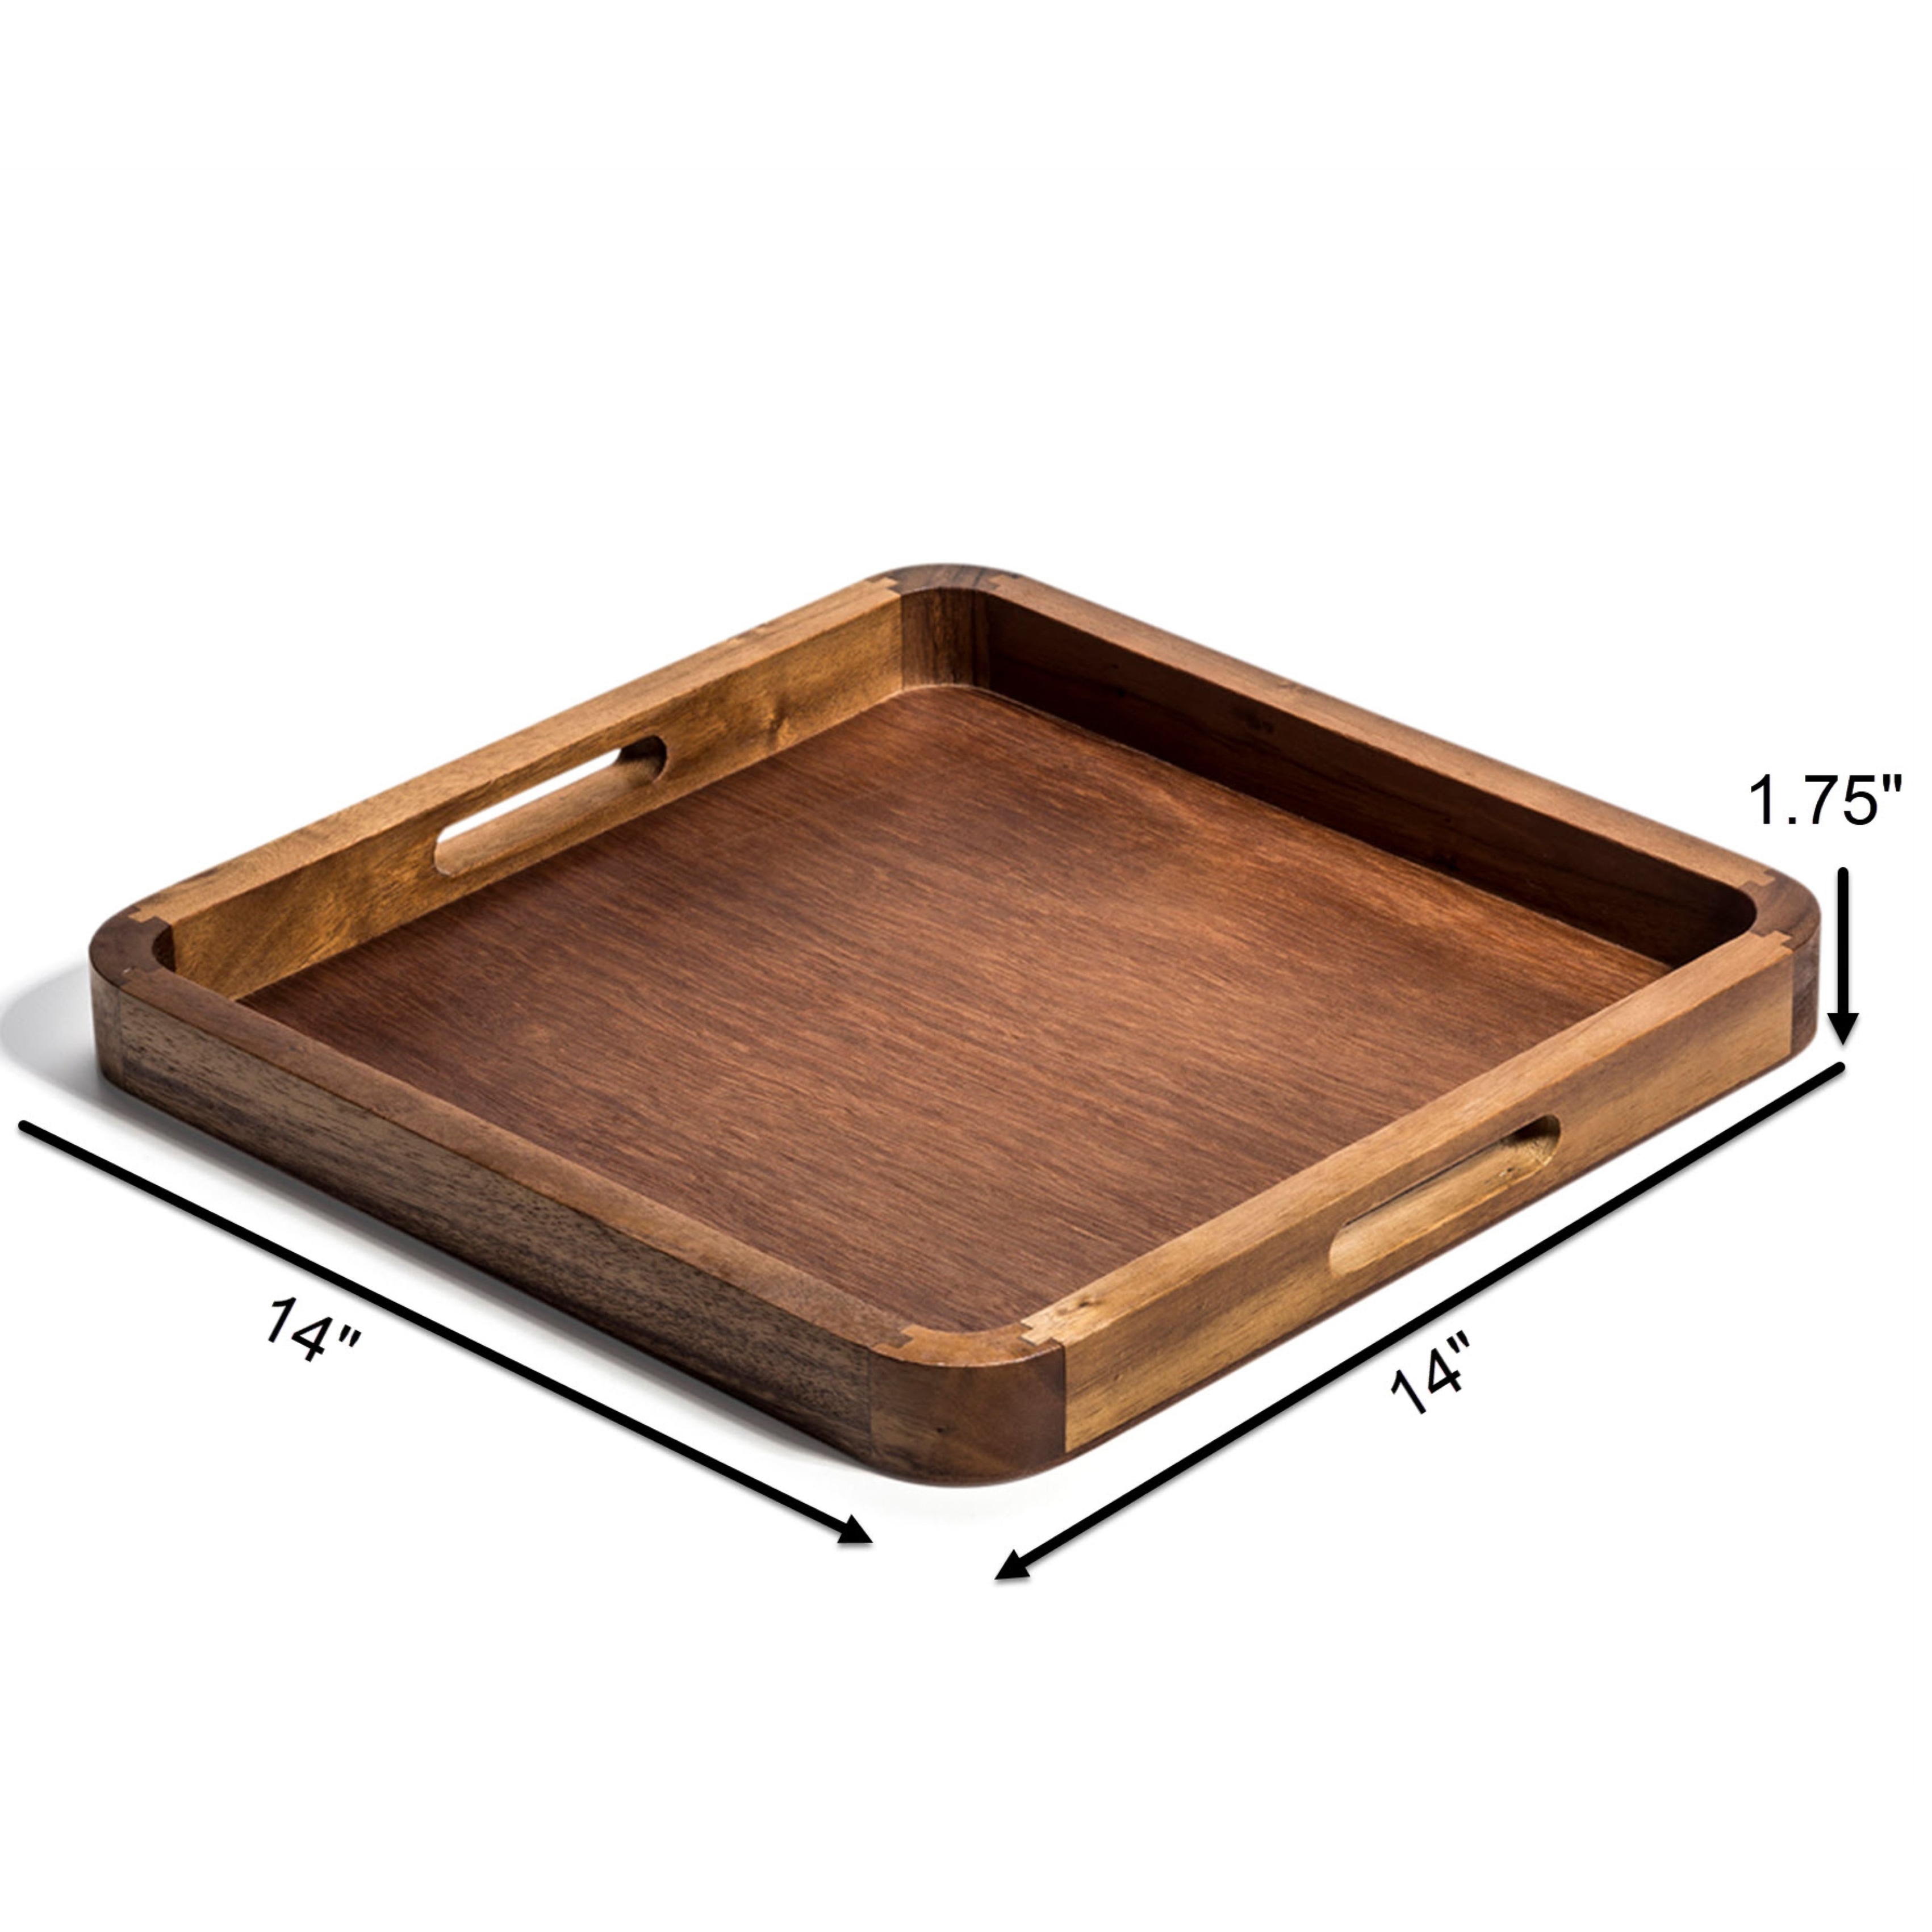 https://ak1.ostkcdn.com/images/products/is/images/direct/16e488a97d7dd01b9933fd70476bdb0692eff04b/Square-Serving-Tray---14%22.jpg